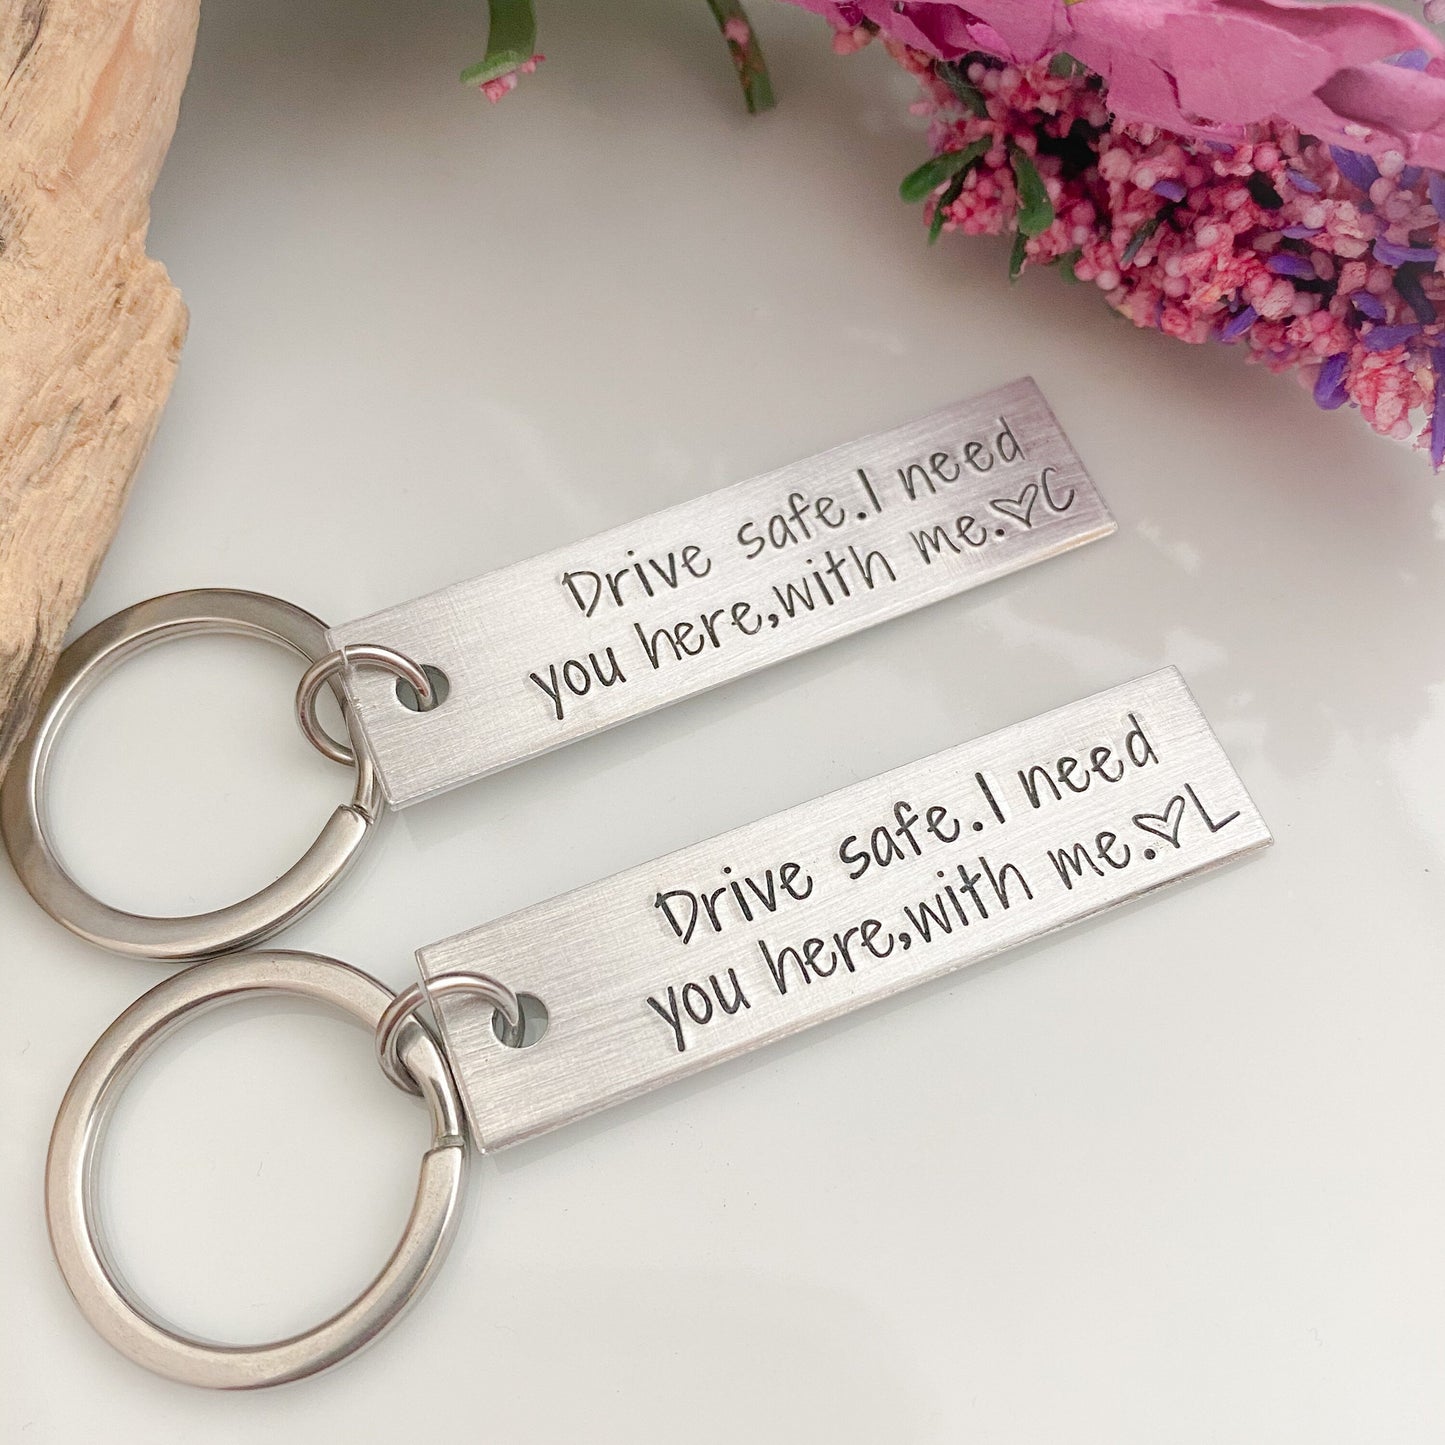 Drive safe I need you here with me keychain--Husband Gift--Boyfriend Gift--New Driver